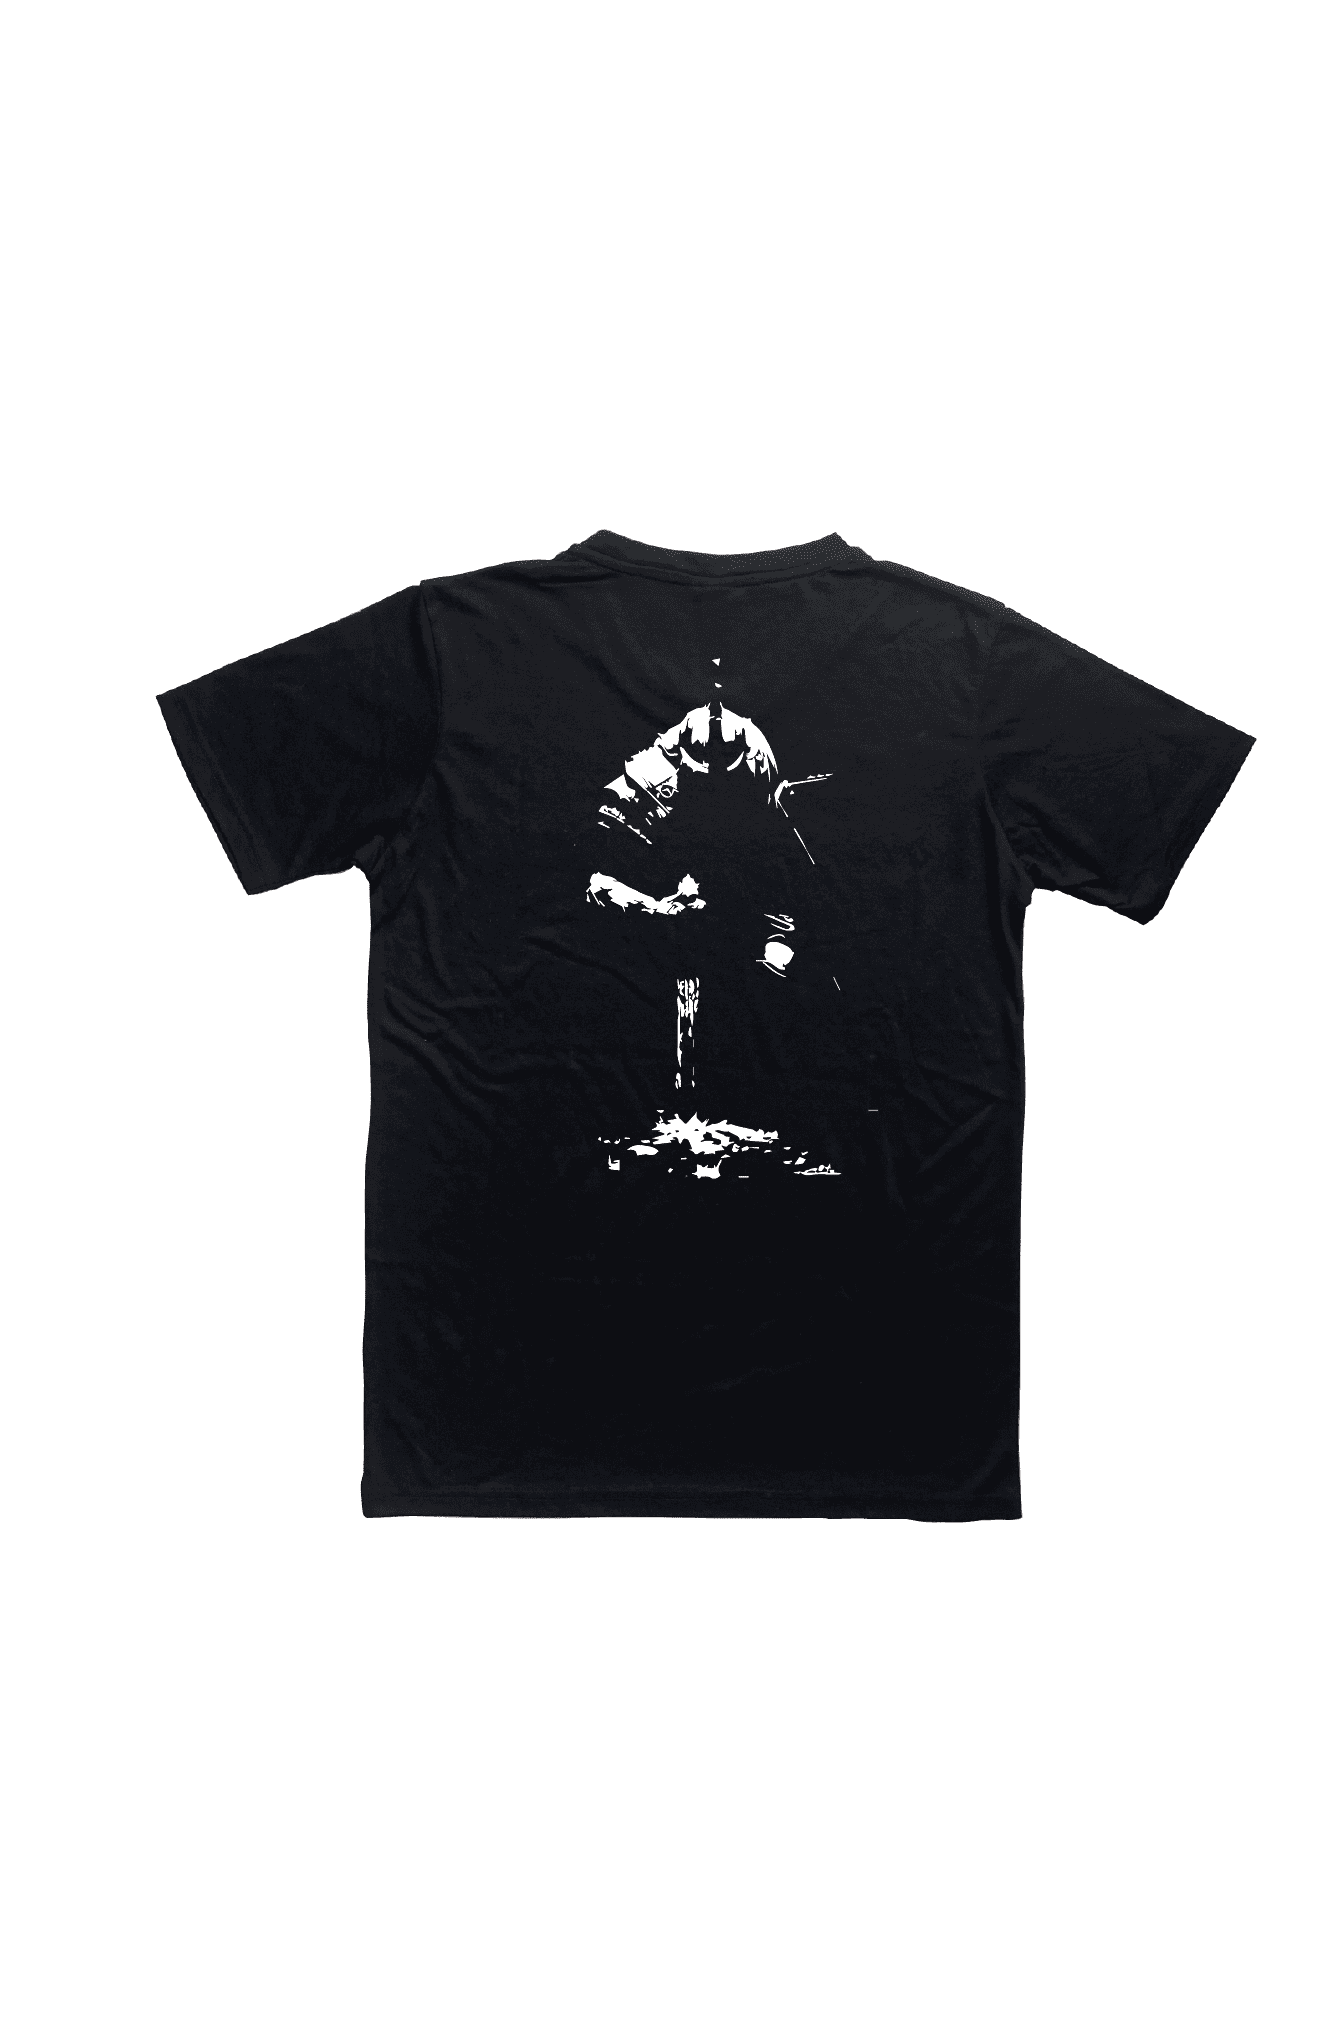 Back of a black unisex t-shirt with a warrior silhouette printed in white.